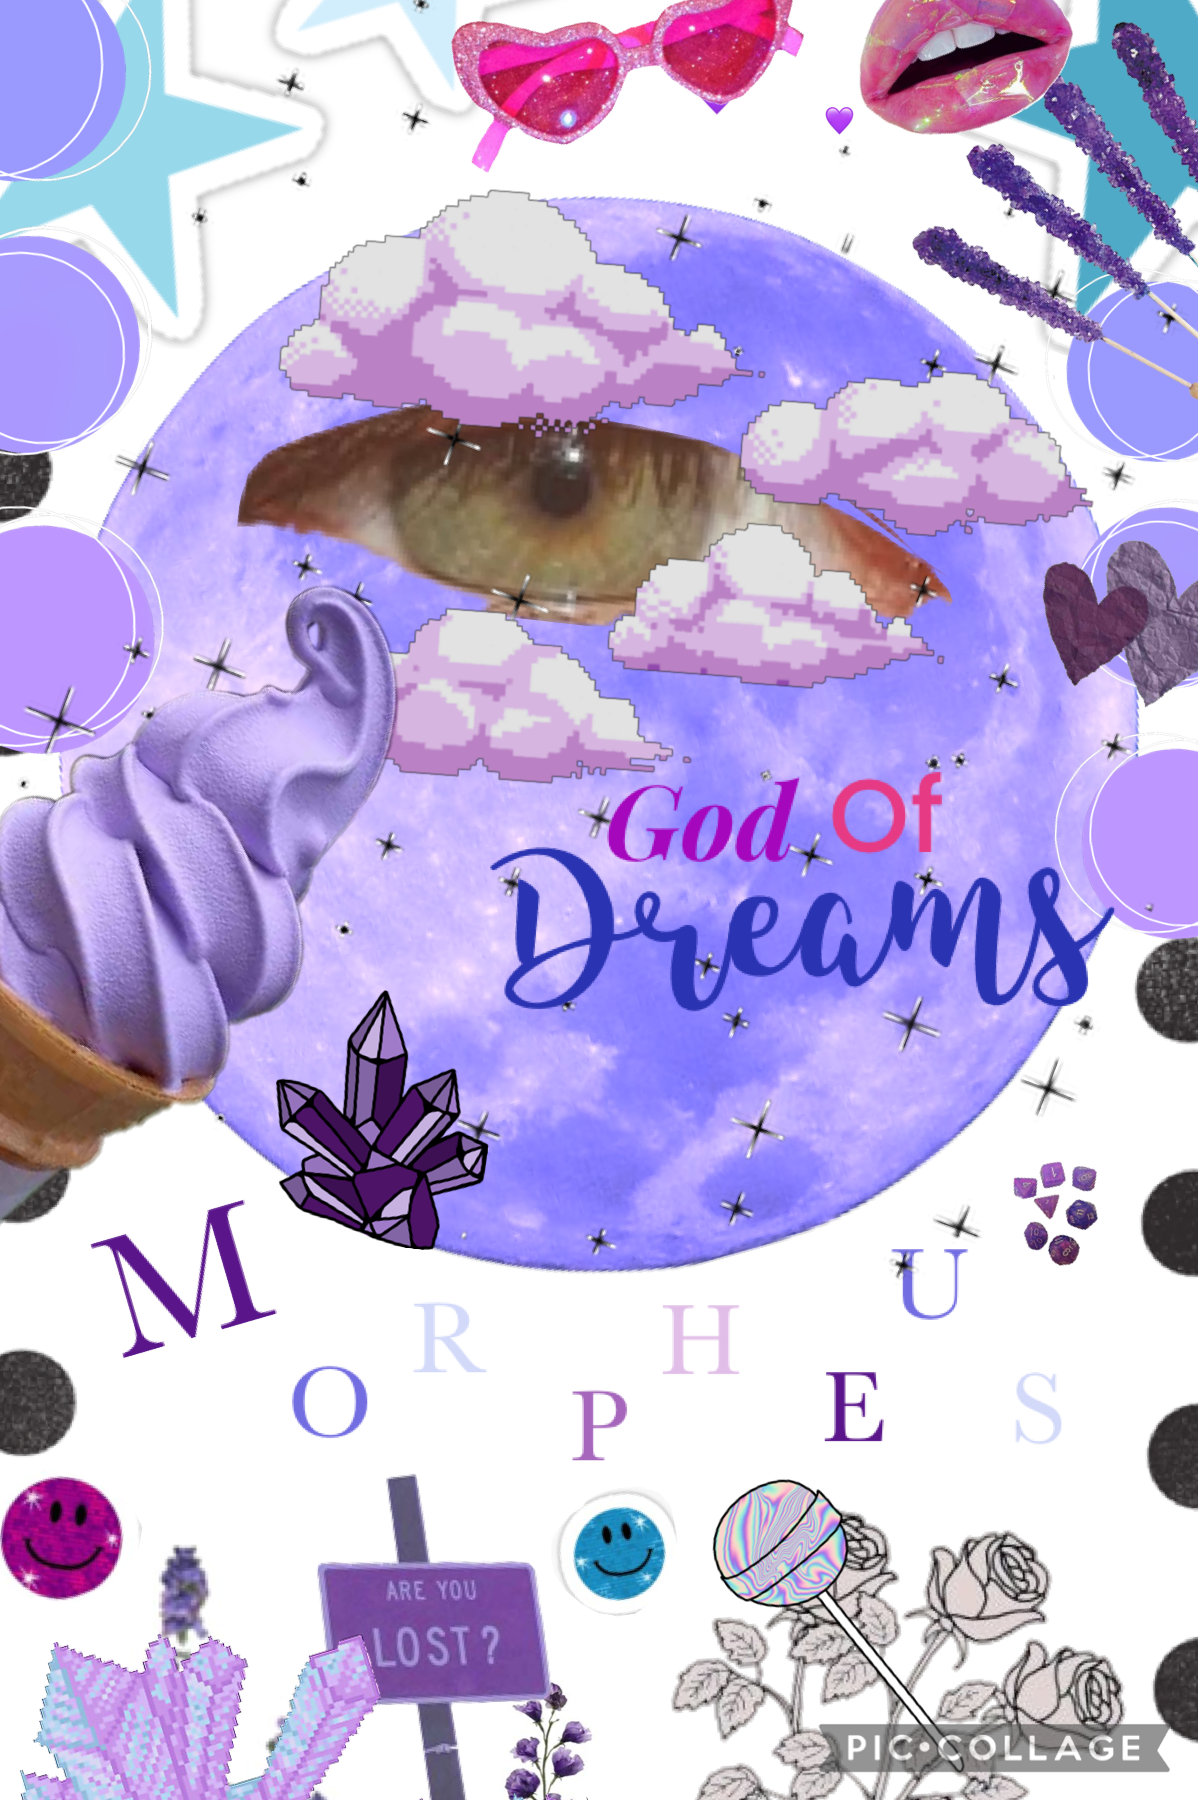 God of dreams-Morpheus collage <3